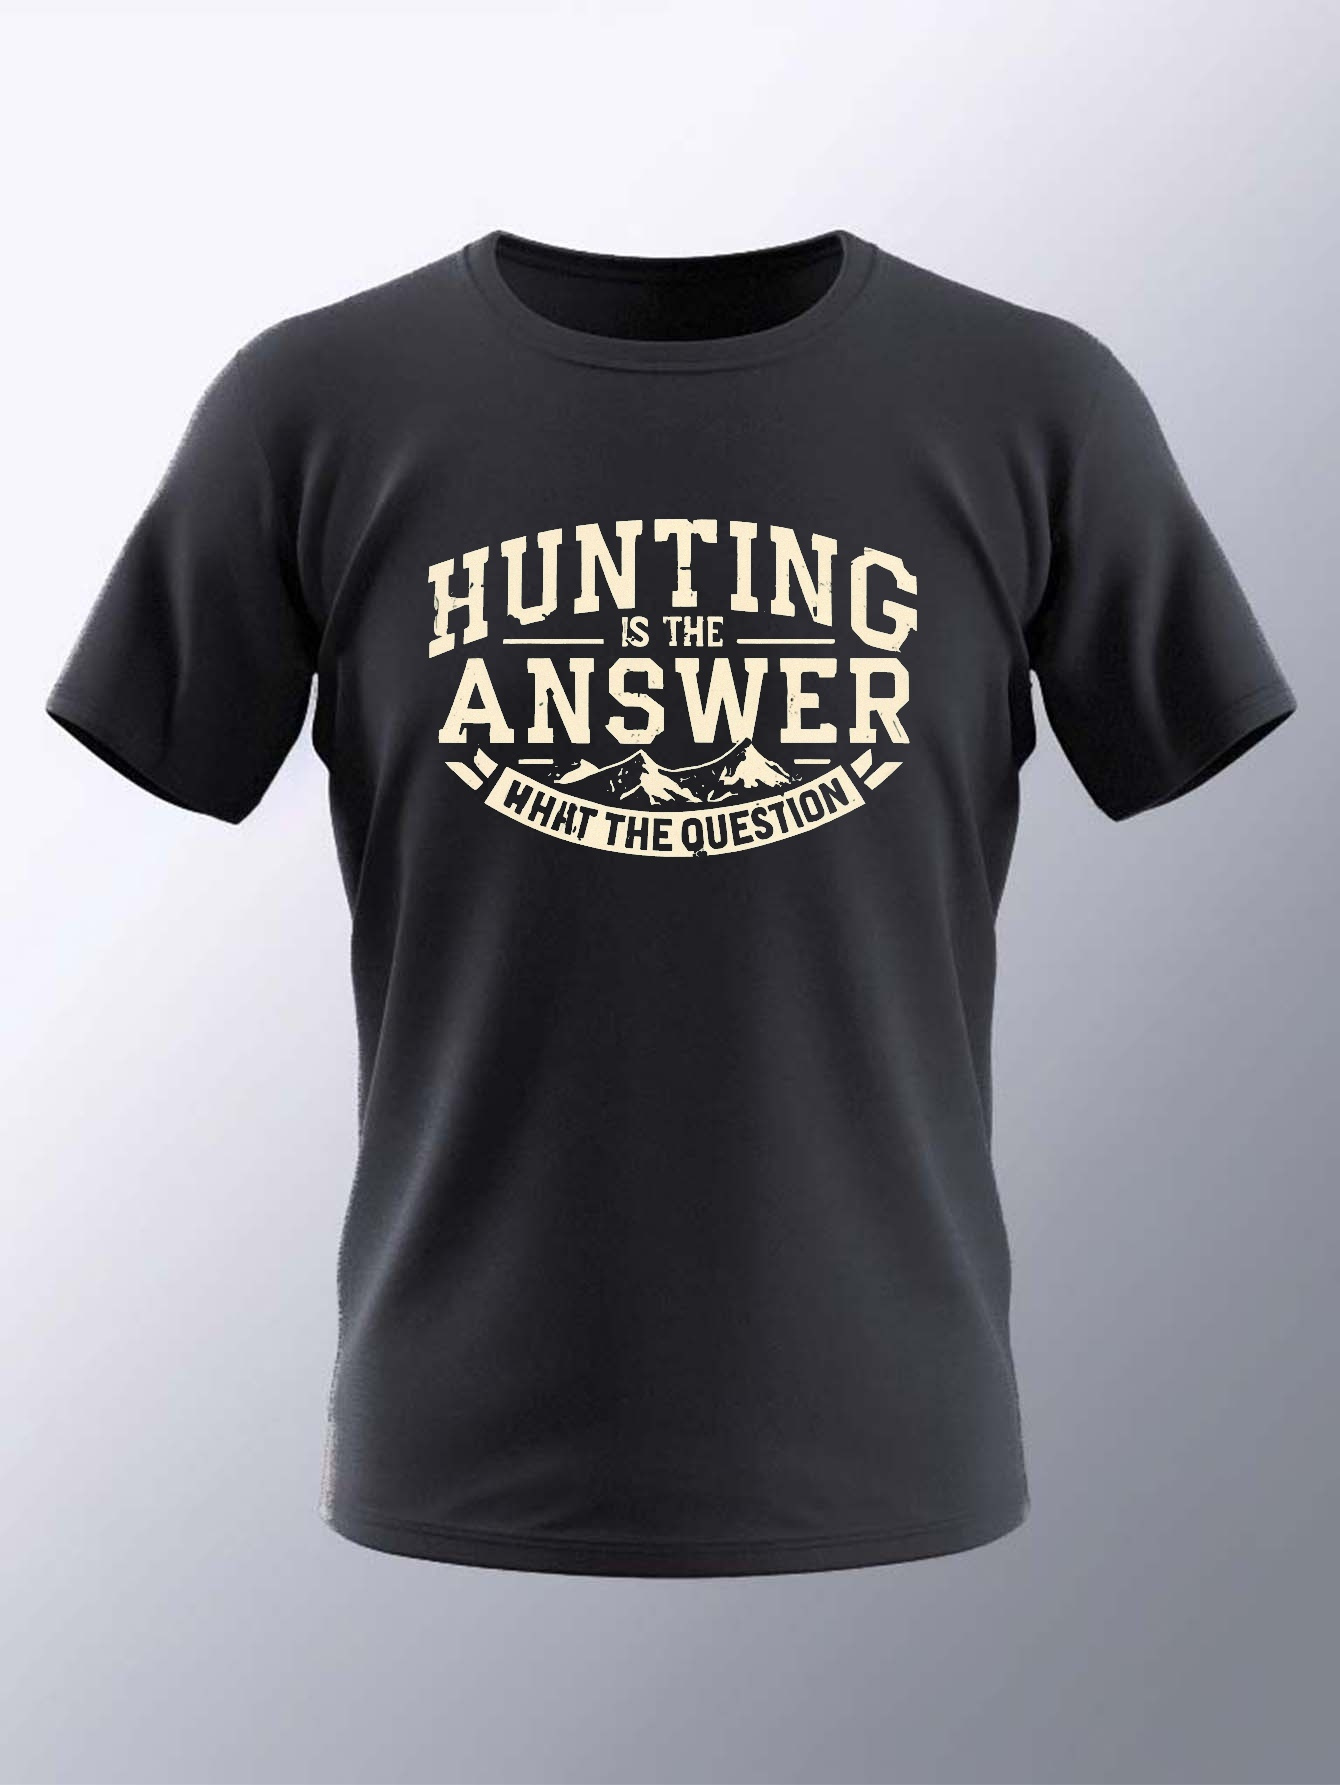 Hunting Shirt, The Only Thing I Love More Than Hunting, Husband Shirt,  Gift For Him, Hubby Tee, Hunting And Fishing, Hunting Dad, Guns, Deer,  Heather